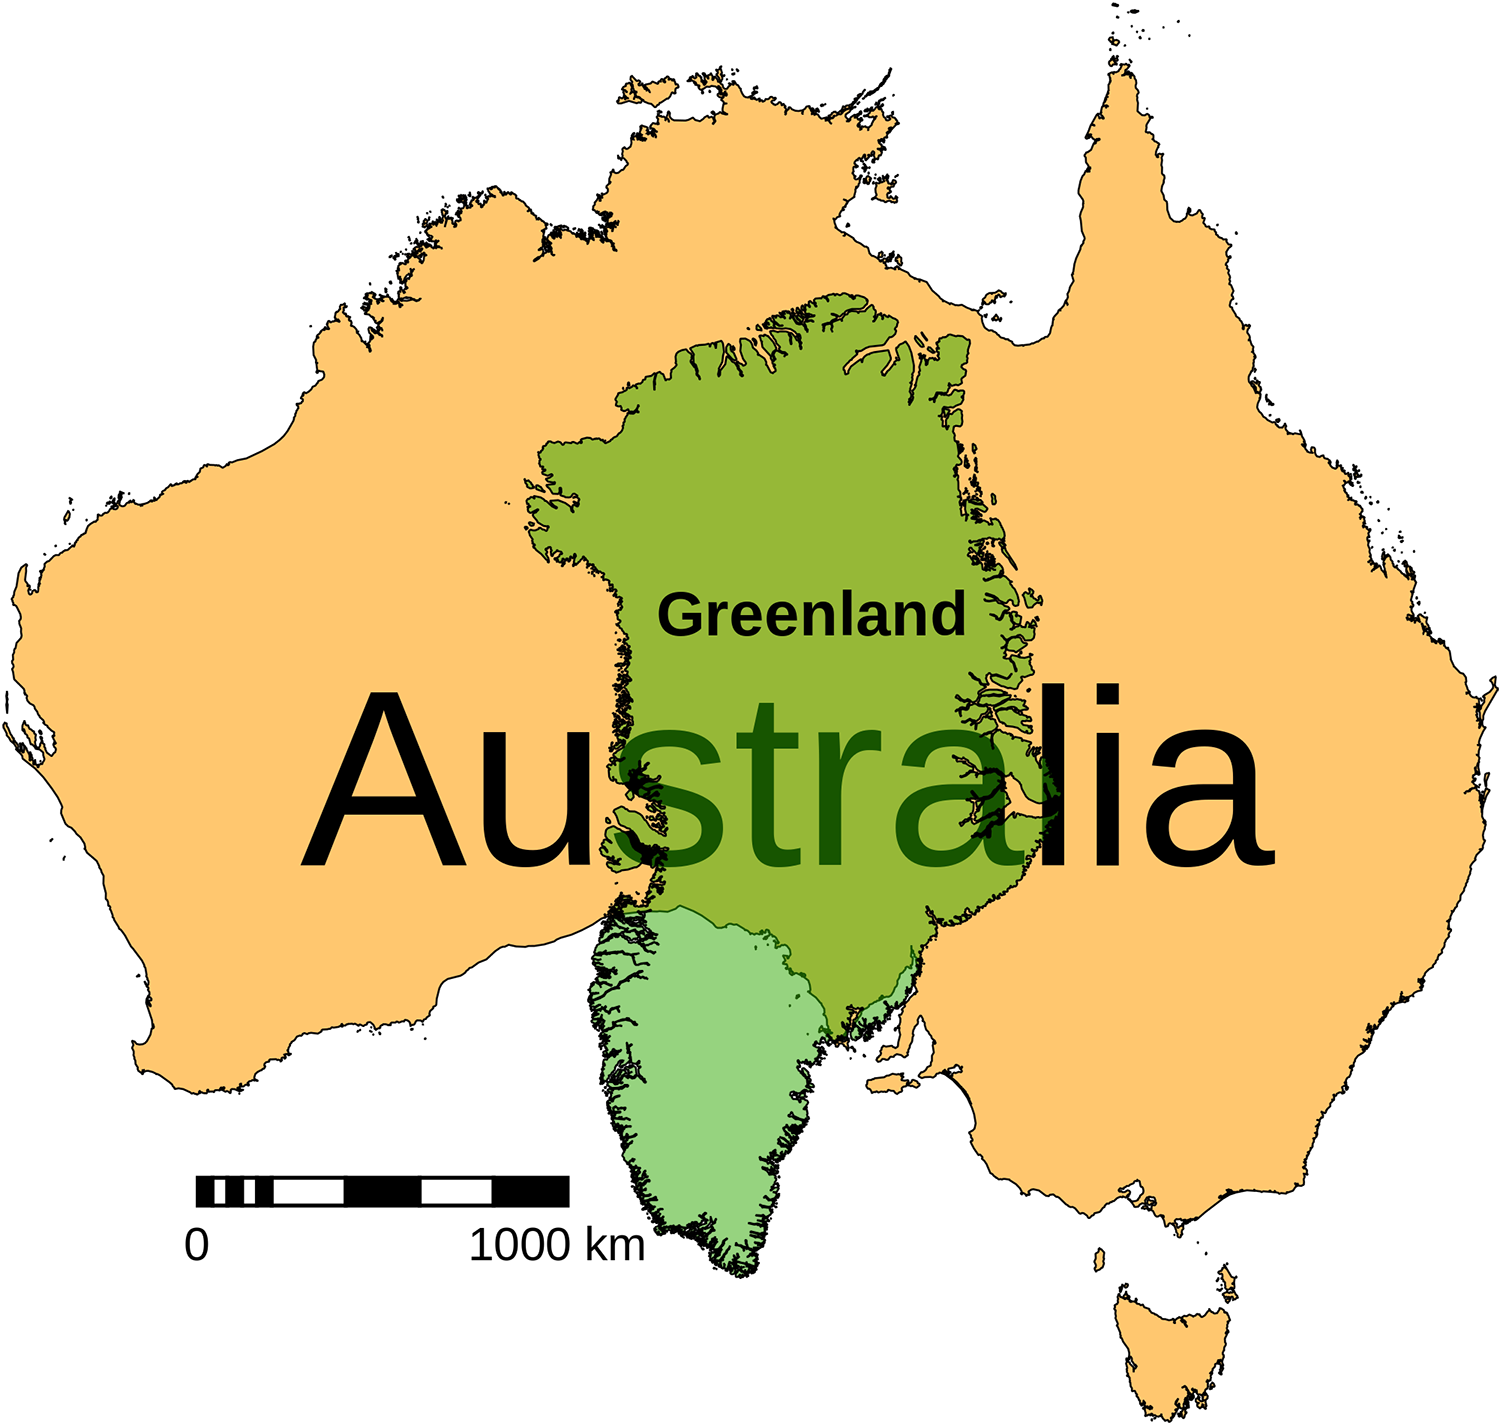 Image of greenland superimposed on Australia.  Purpose of image is to highlight how small Greenland is relative to Australia. © Benjamin Hell, 9 Nov 2012 / Wikimedia Commons / CC-BY-SA-3.0